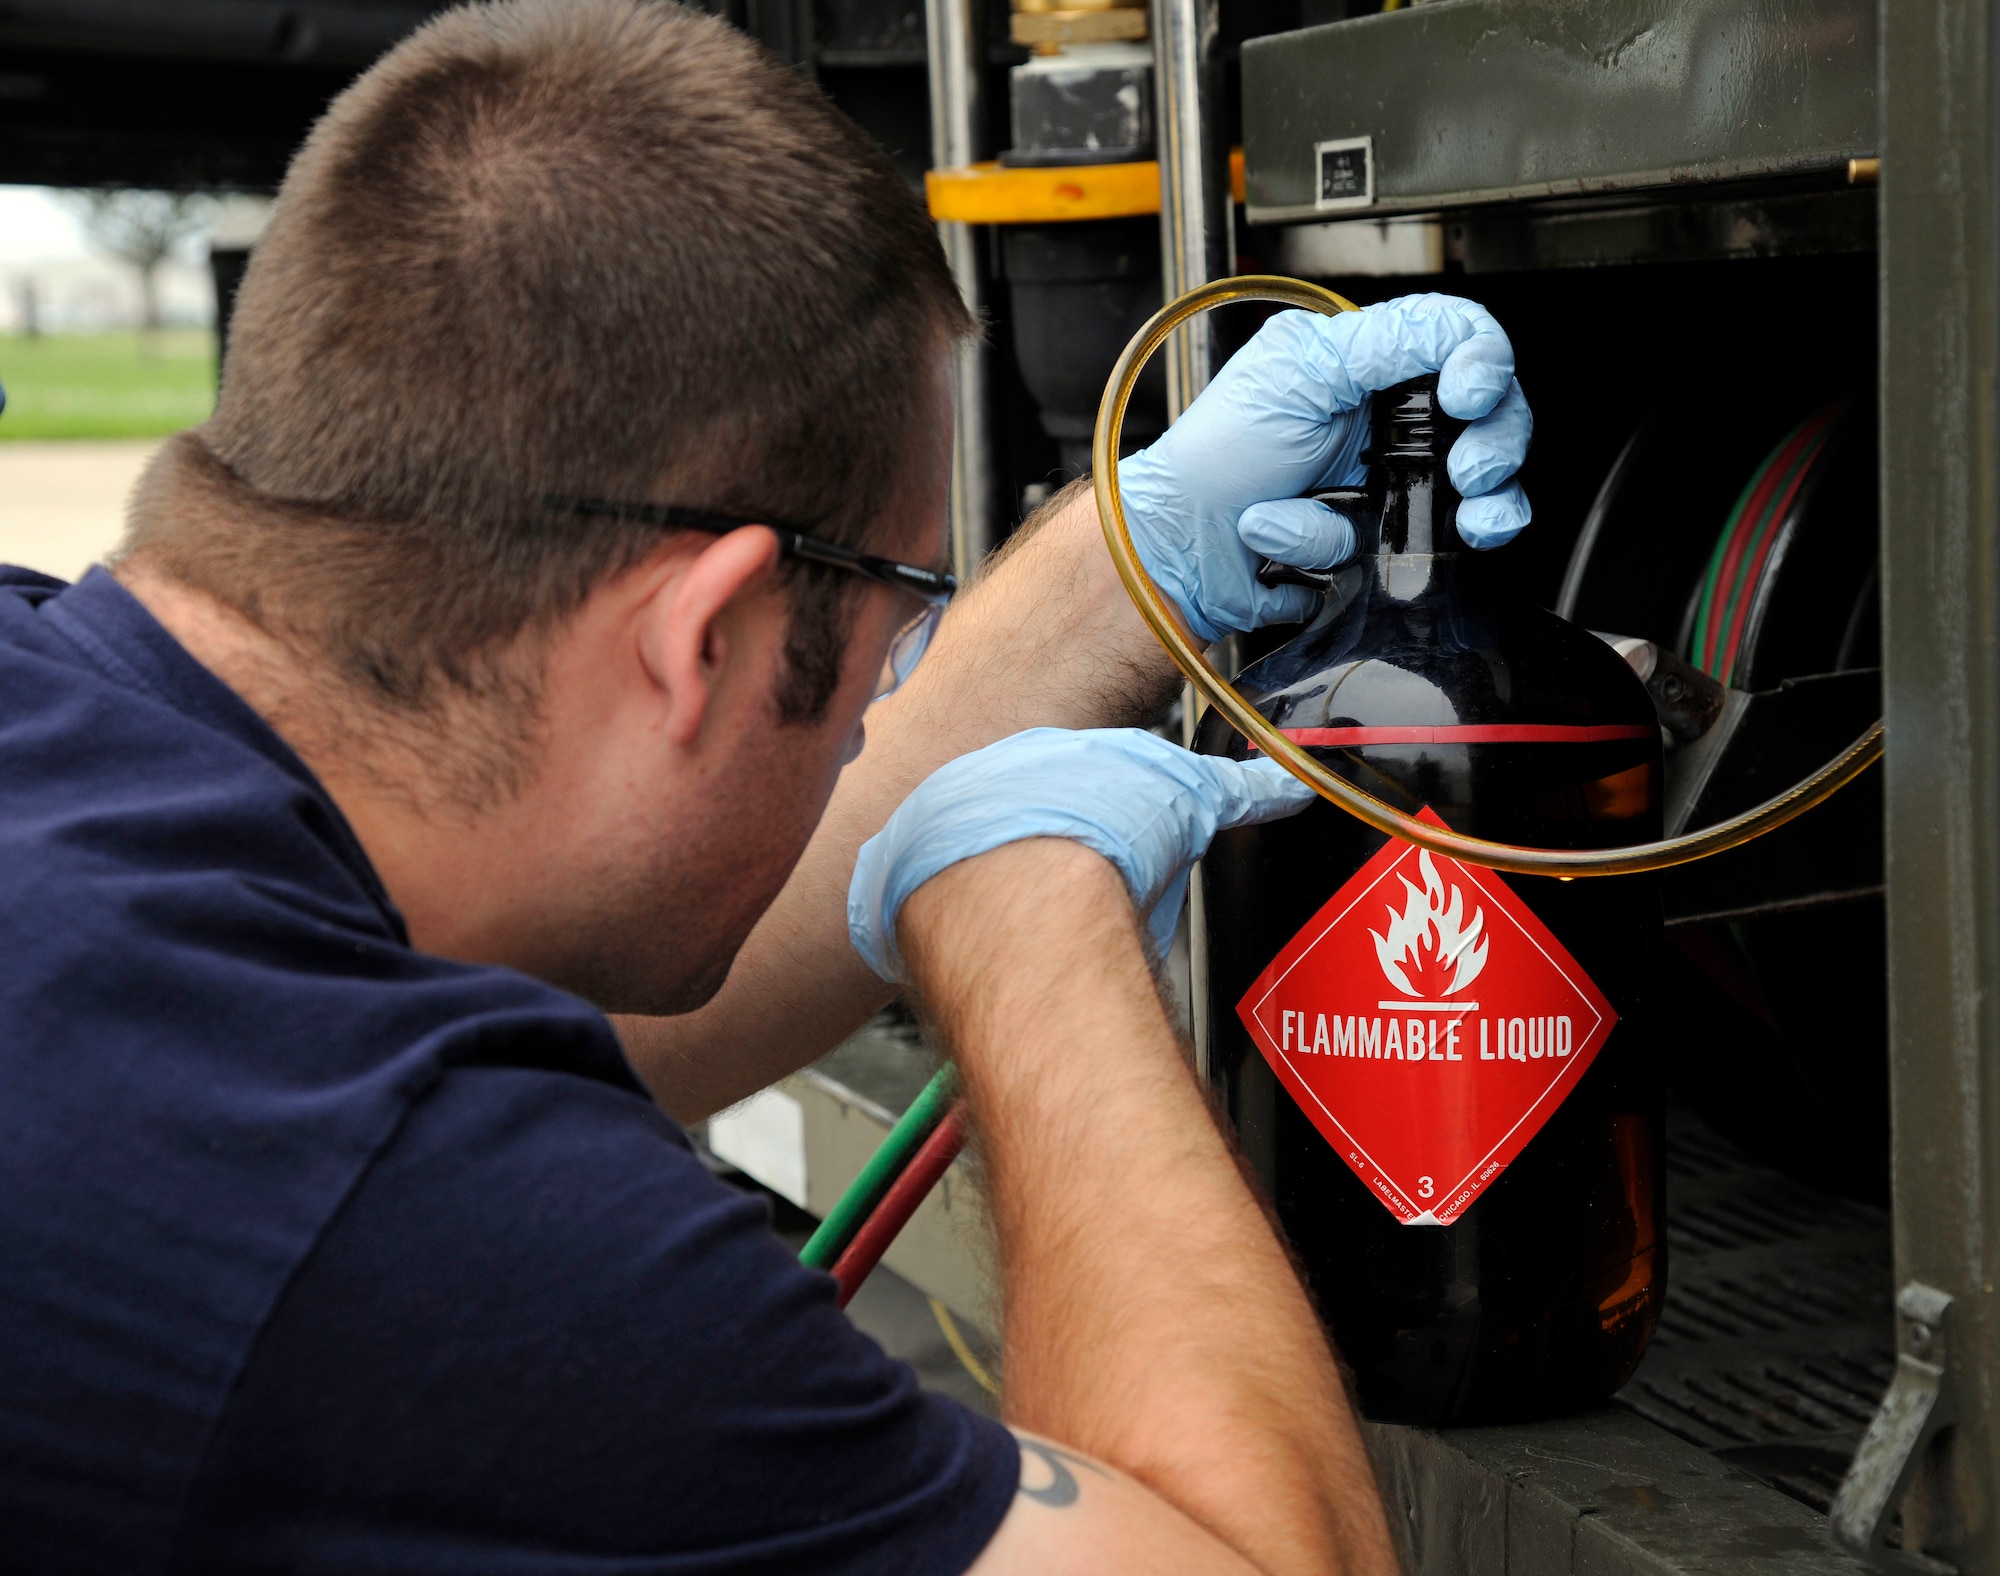 Staff Sgt. Joseph Fournier, 127th Logistics Readiness Squadron fuels distribution worker, drains fuel from a fuel truck at Selfridge Air National Guard Base, Mich., July 9, 2015. Fournier is checking to ensure the correct amount is obtained for testing. (U.S. Air National Guard photo by Senior Airman Ryan Zeski/Released)